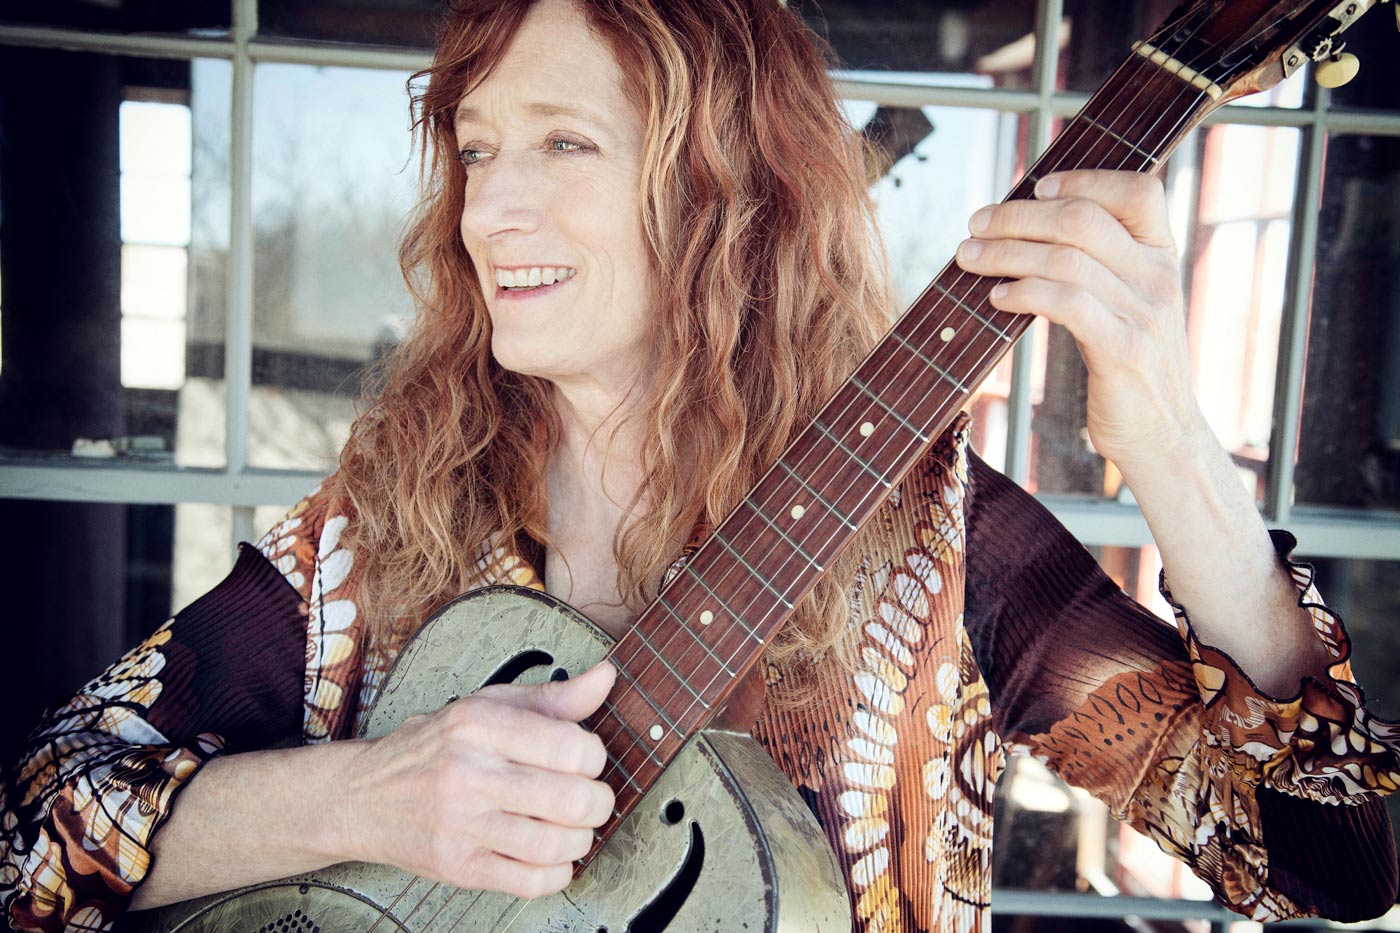 Patty Larkin is a visionary of sound and wonder made of equal parts guitar wizardry, vocals shot through with soul and inventive lyrics that ripple across the terrain of the heart.